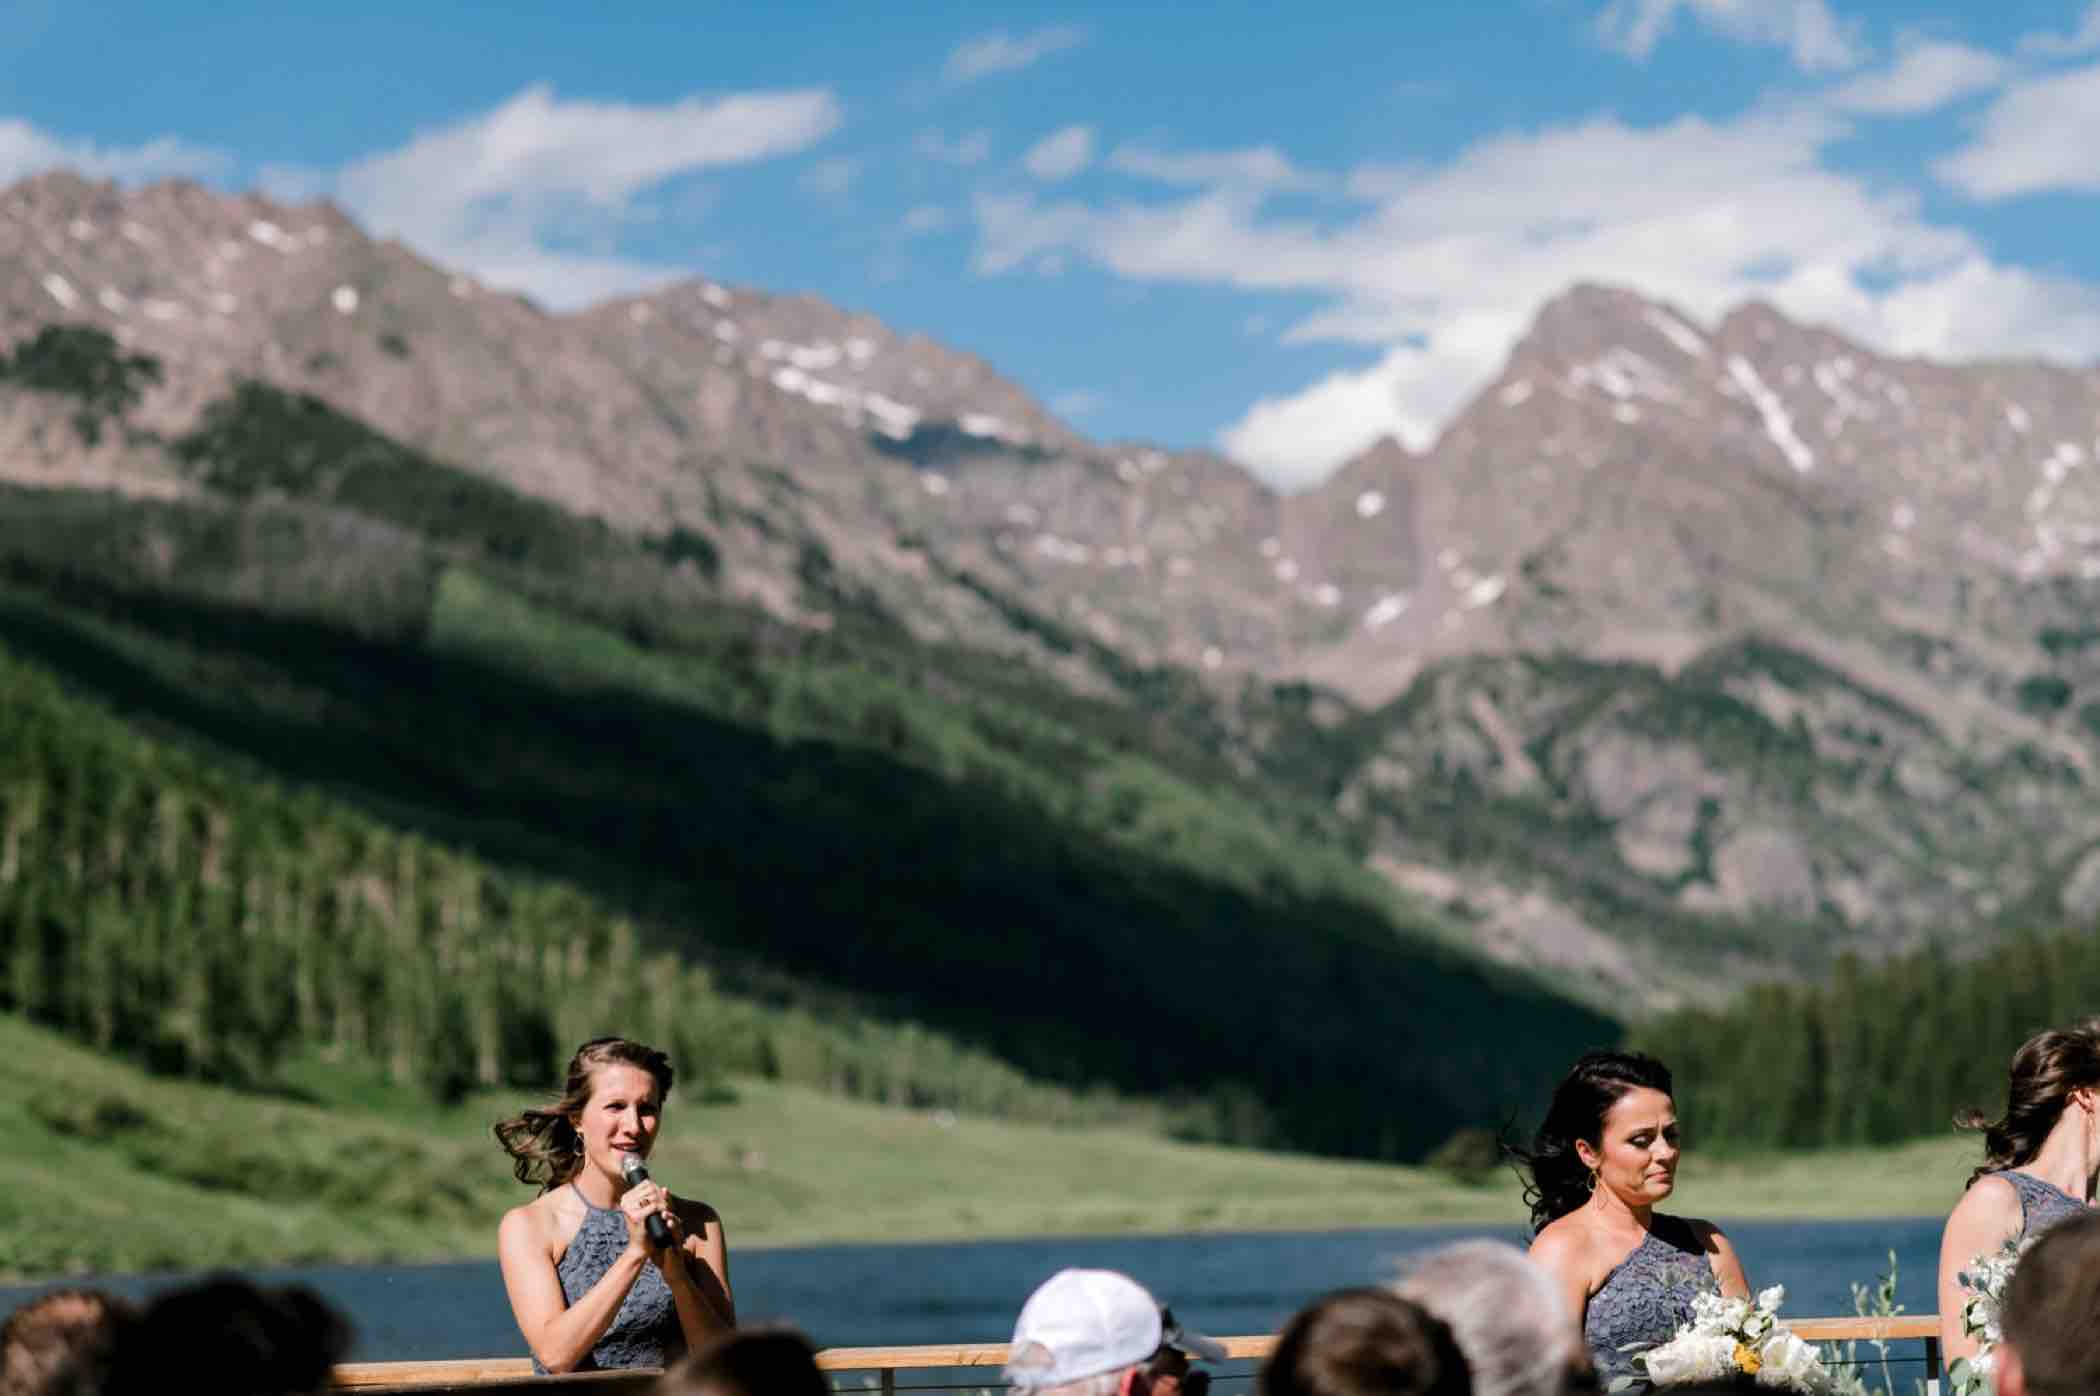 The Gore Range can be seen from the wedding site of Piney River Ranch in Vail, Colorado. Photo by Ali and Garrett, Romantic, Adventurous, Nostalgic Wedding Photographers.